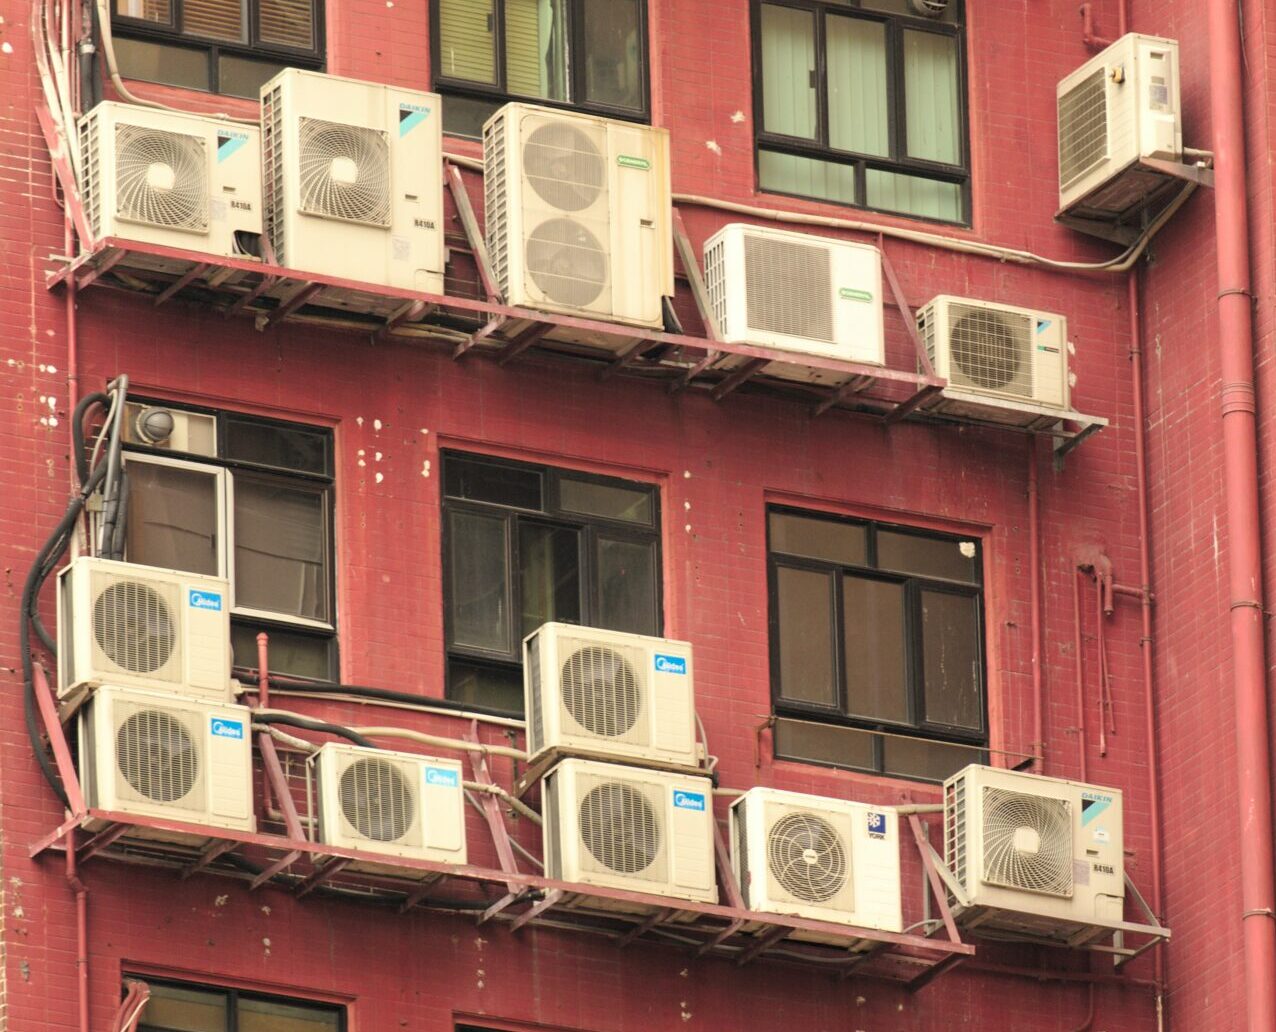 outside air conditioners on red building